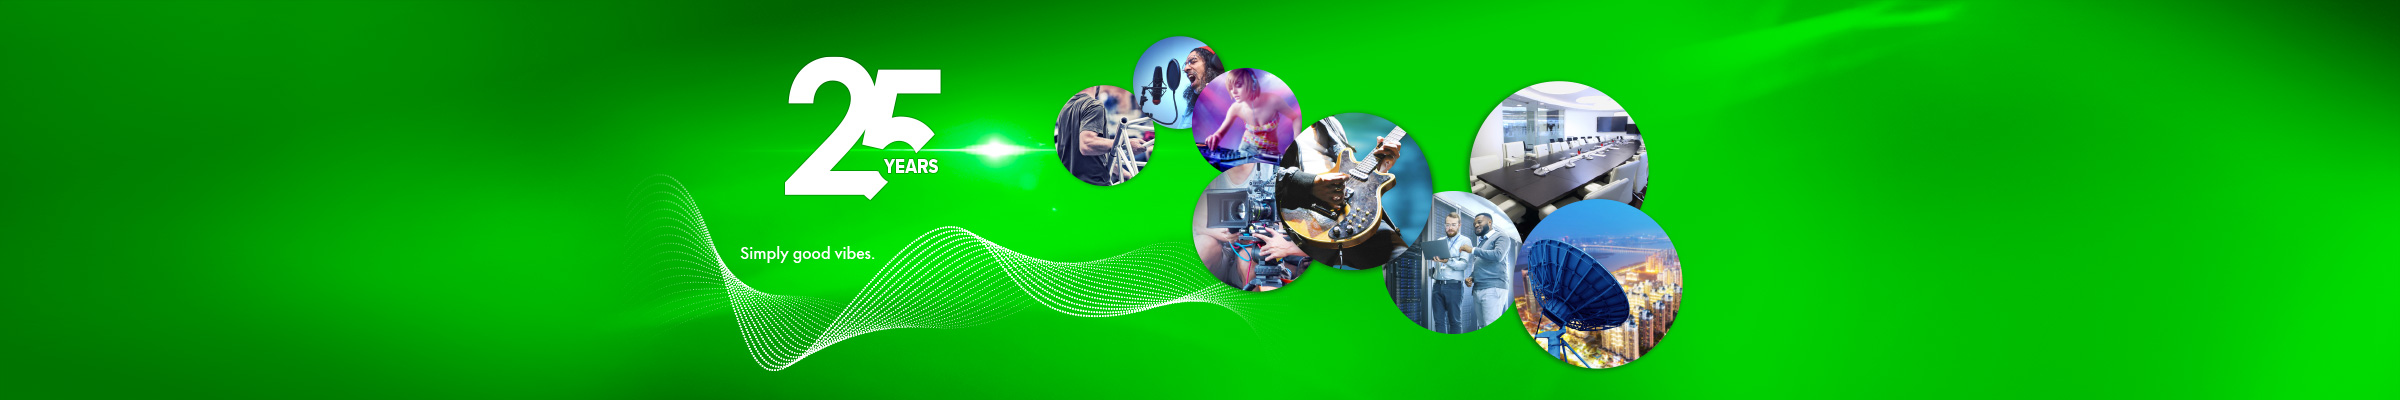 A green picture with small circles on the right showing the various sectors in which our cables can be used, with “25 years” written to the left.